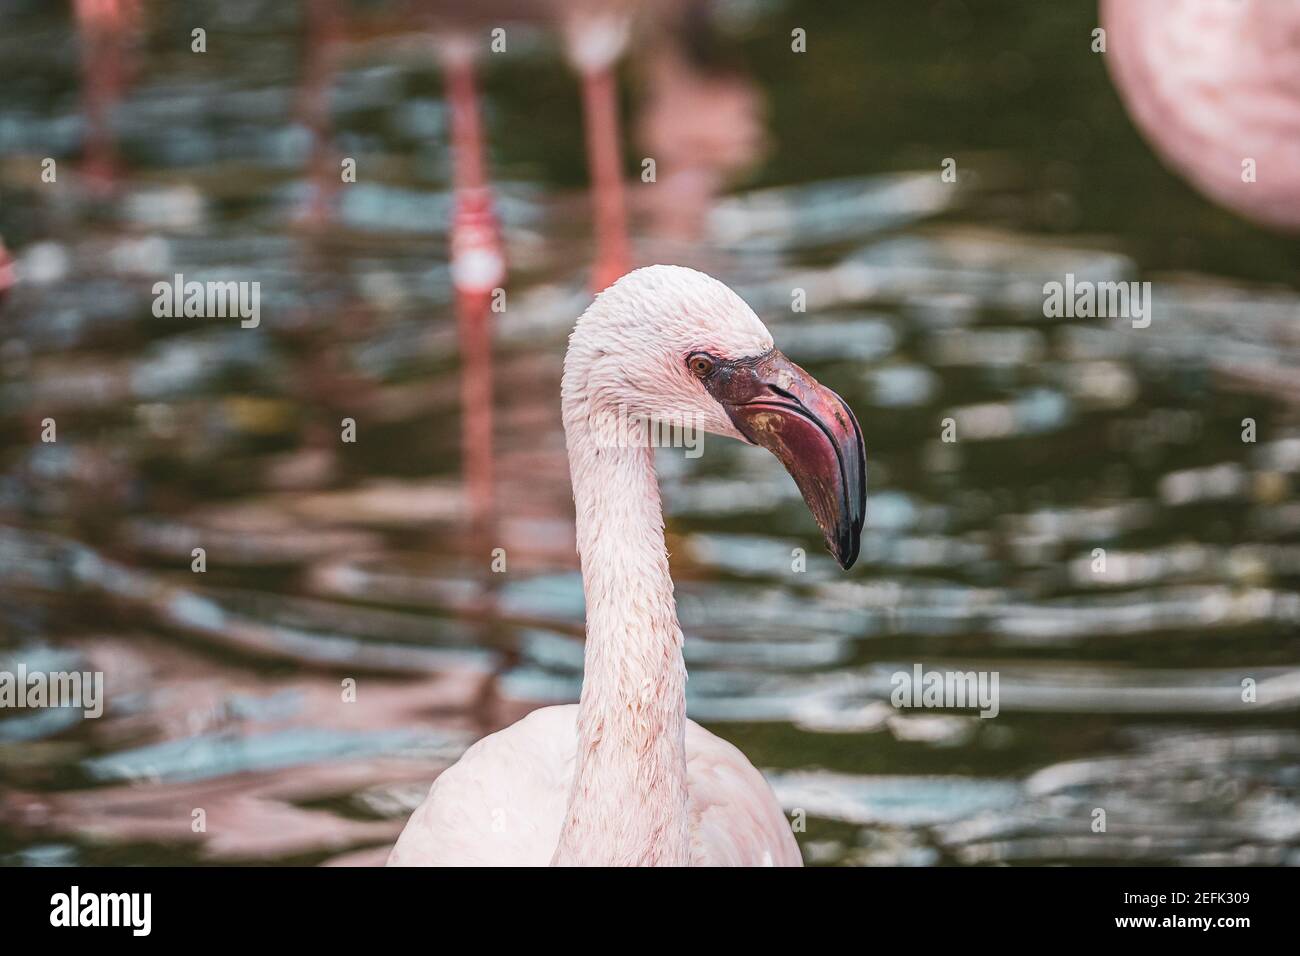 porttrait of a flamingo wading through the water searching for food, germany Stock Photo